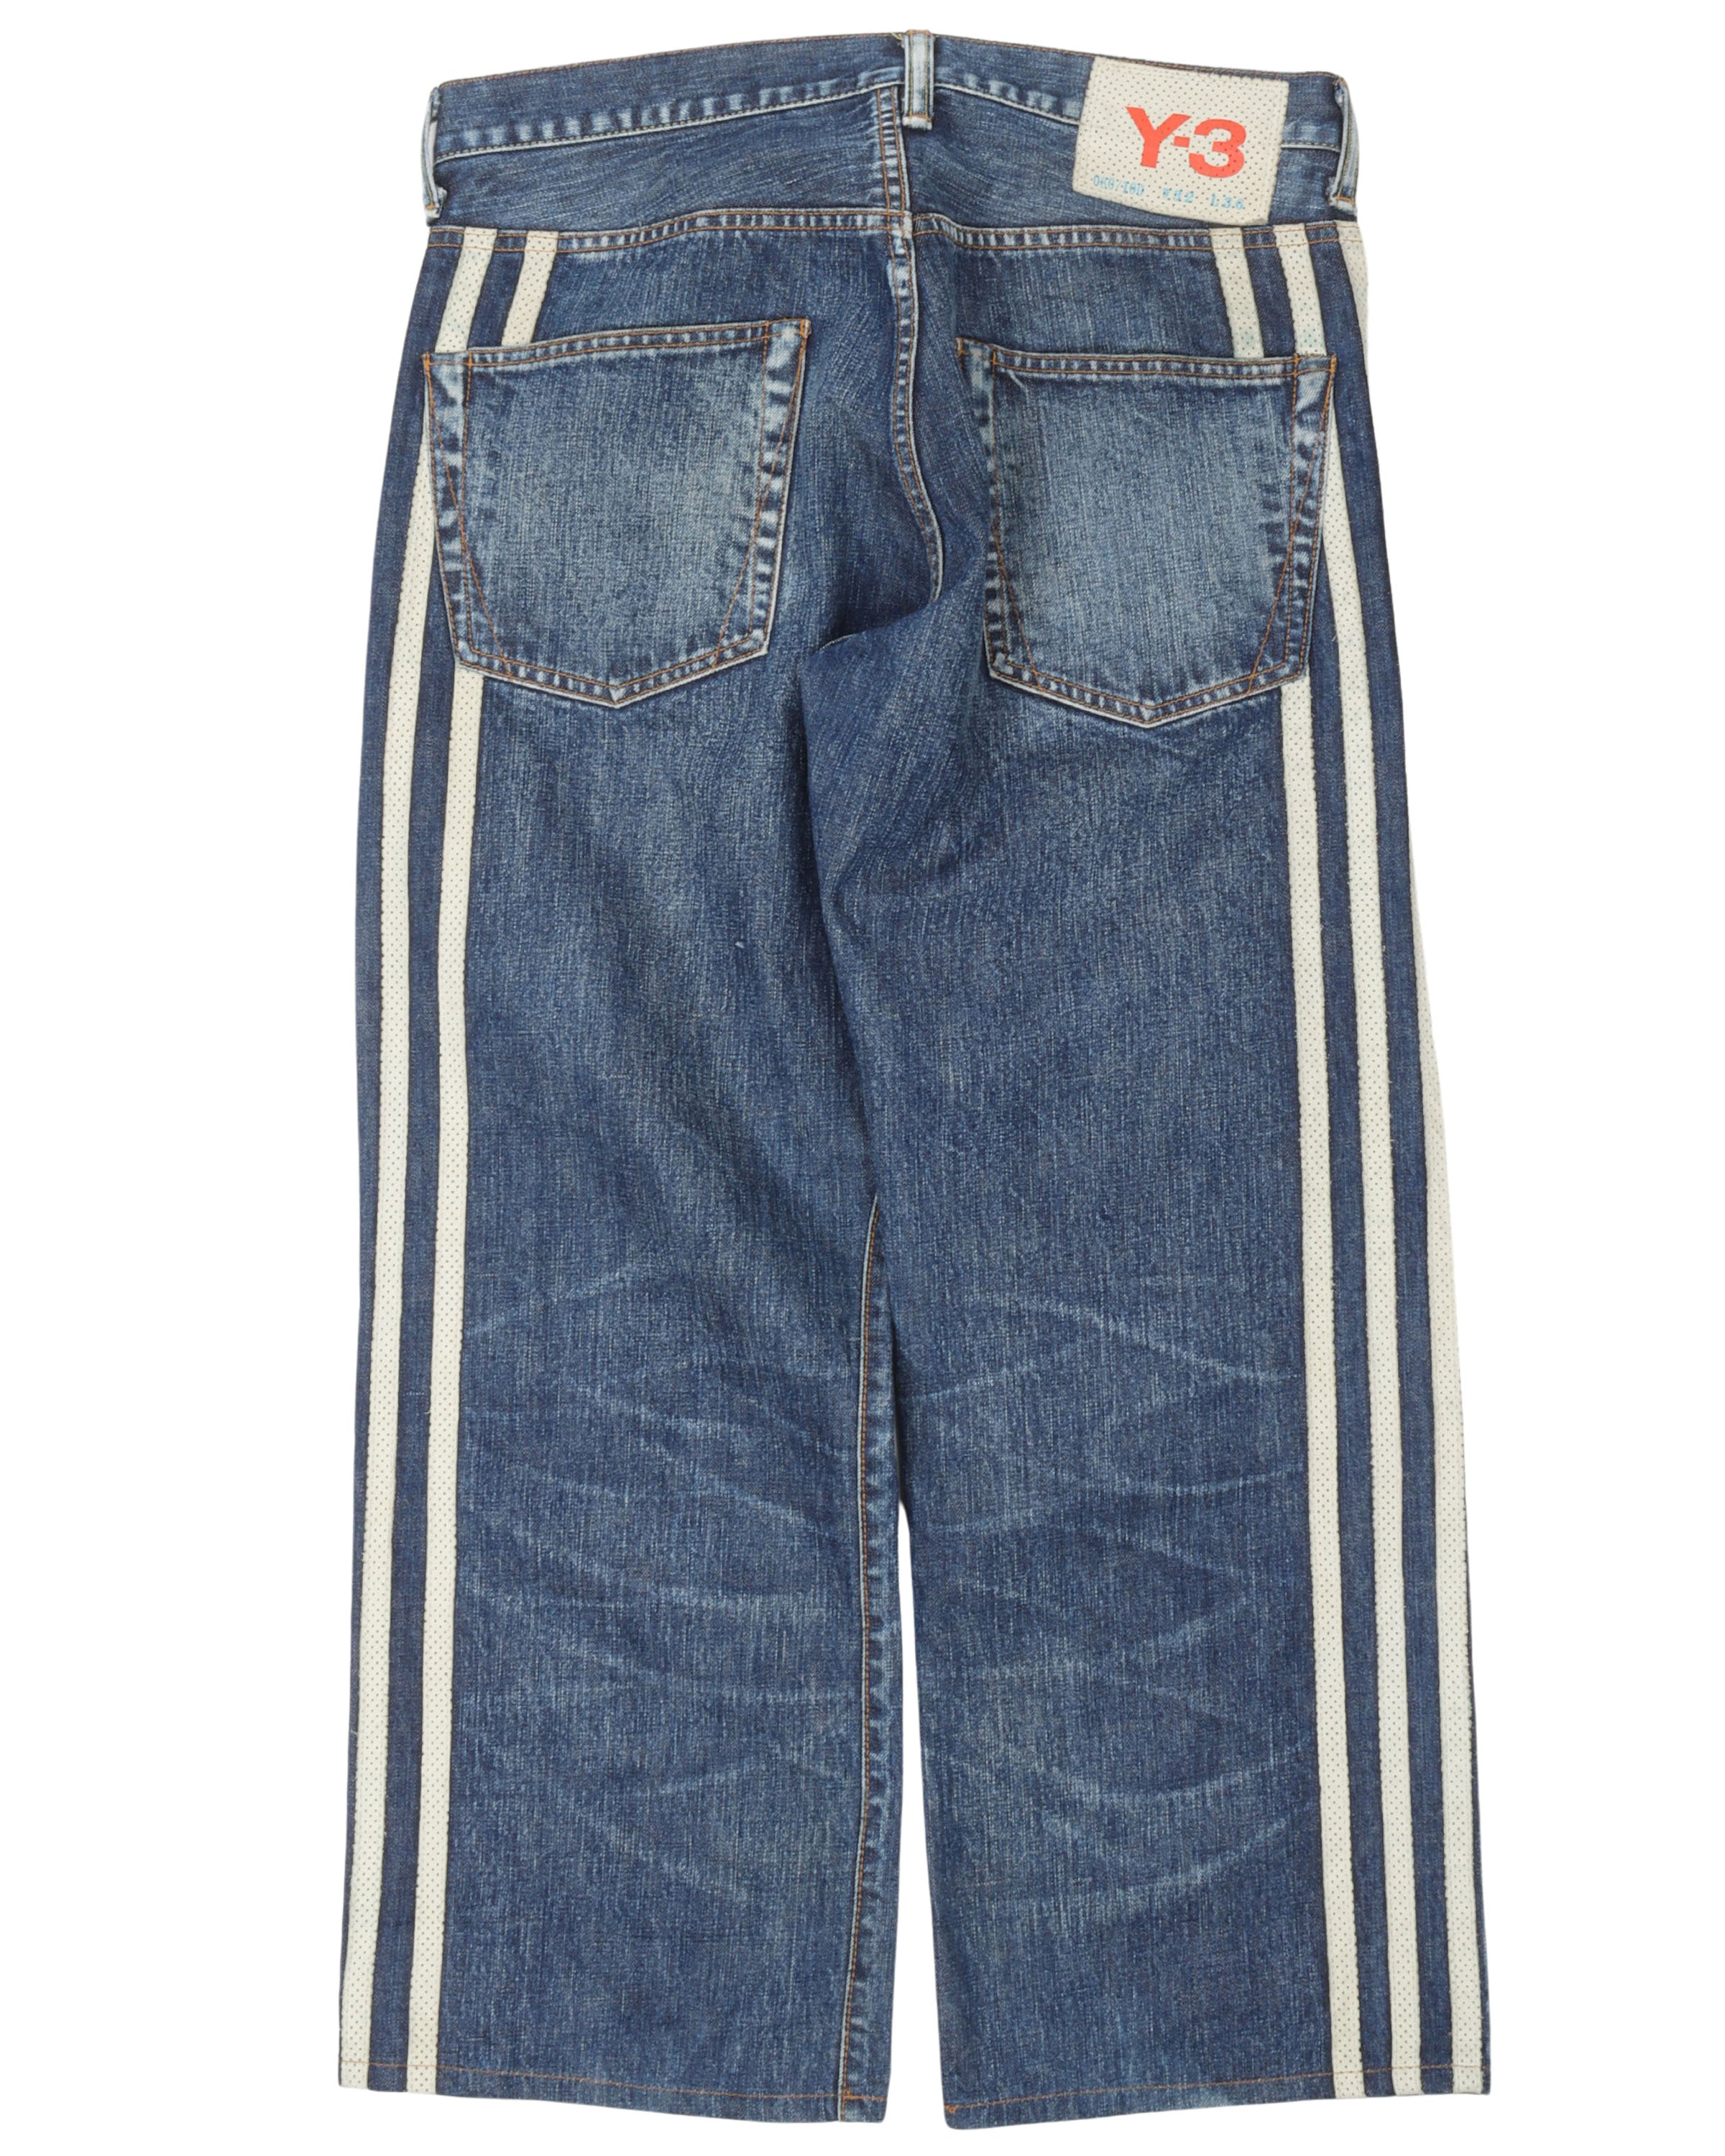 AW04 Spotted Horse Y-3 Adidas Striped Jeans 80/100